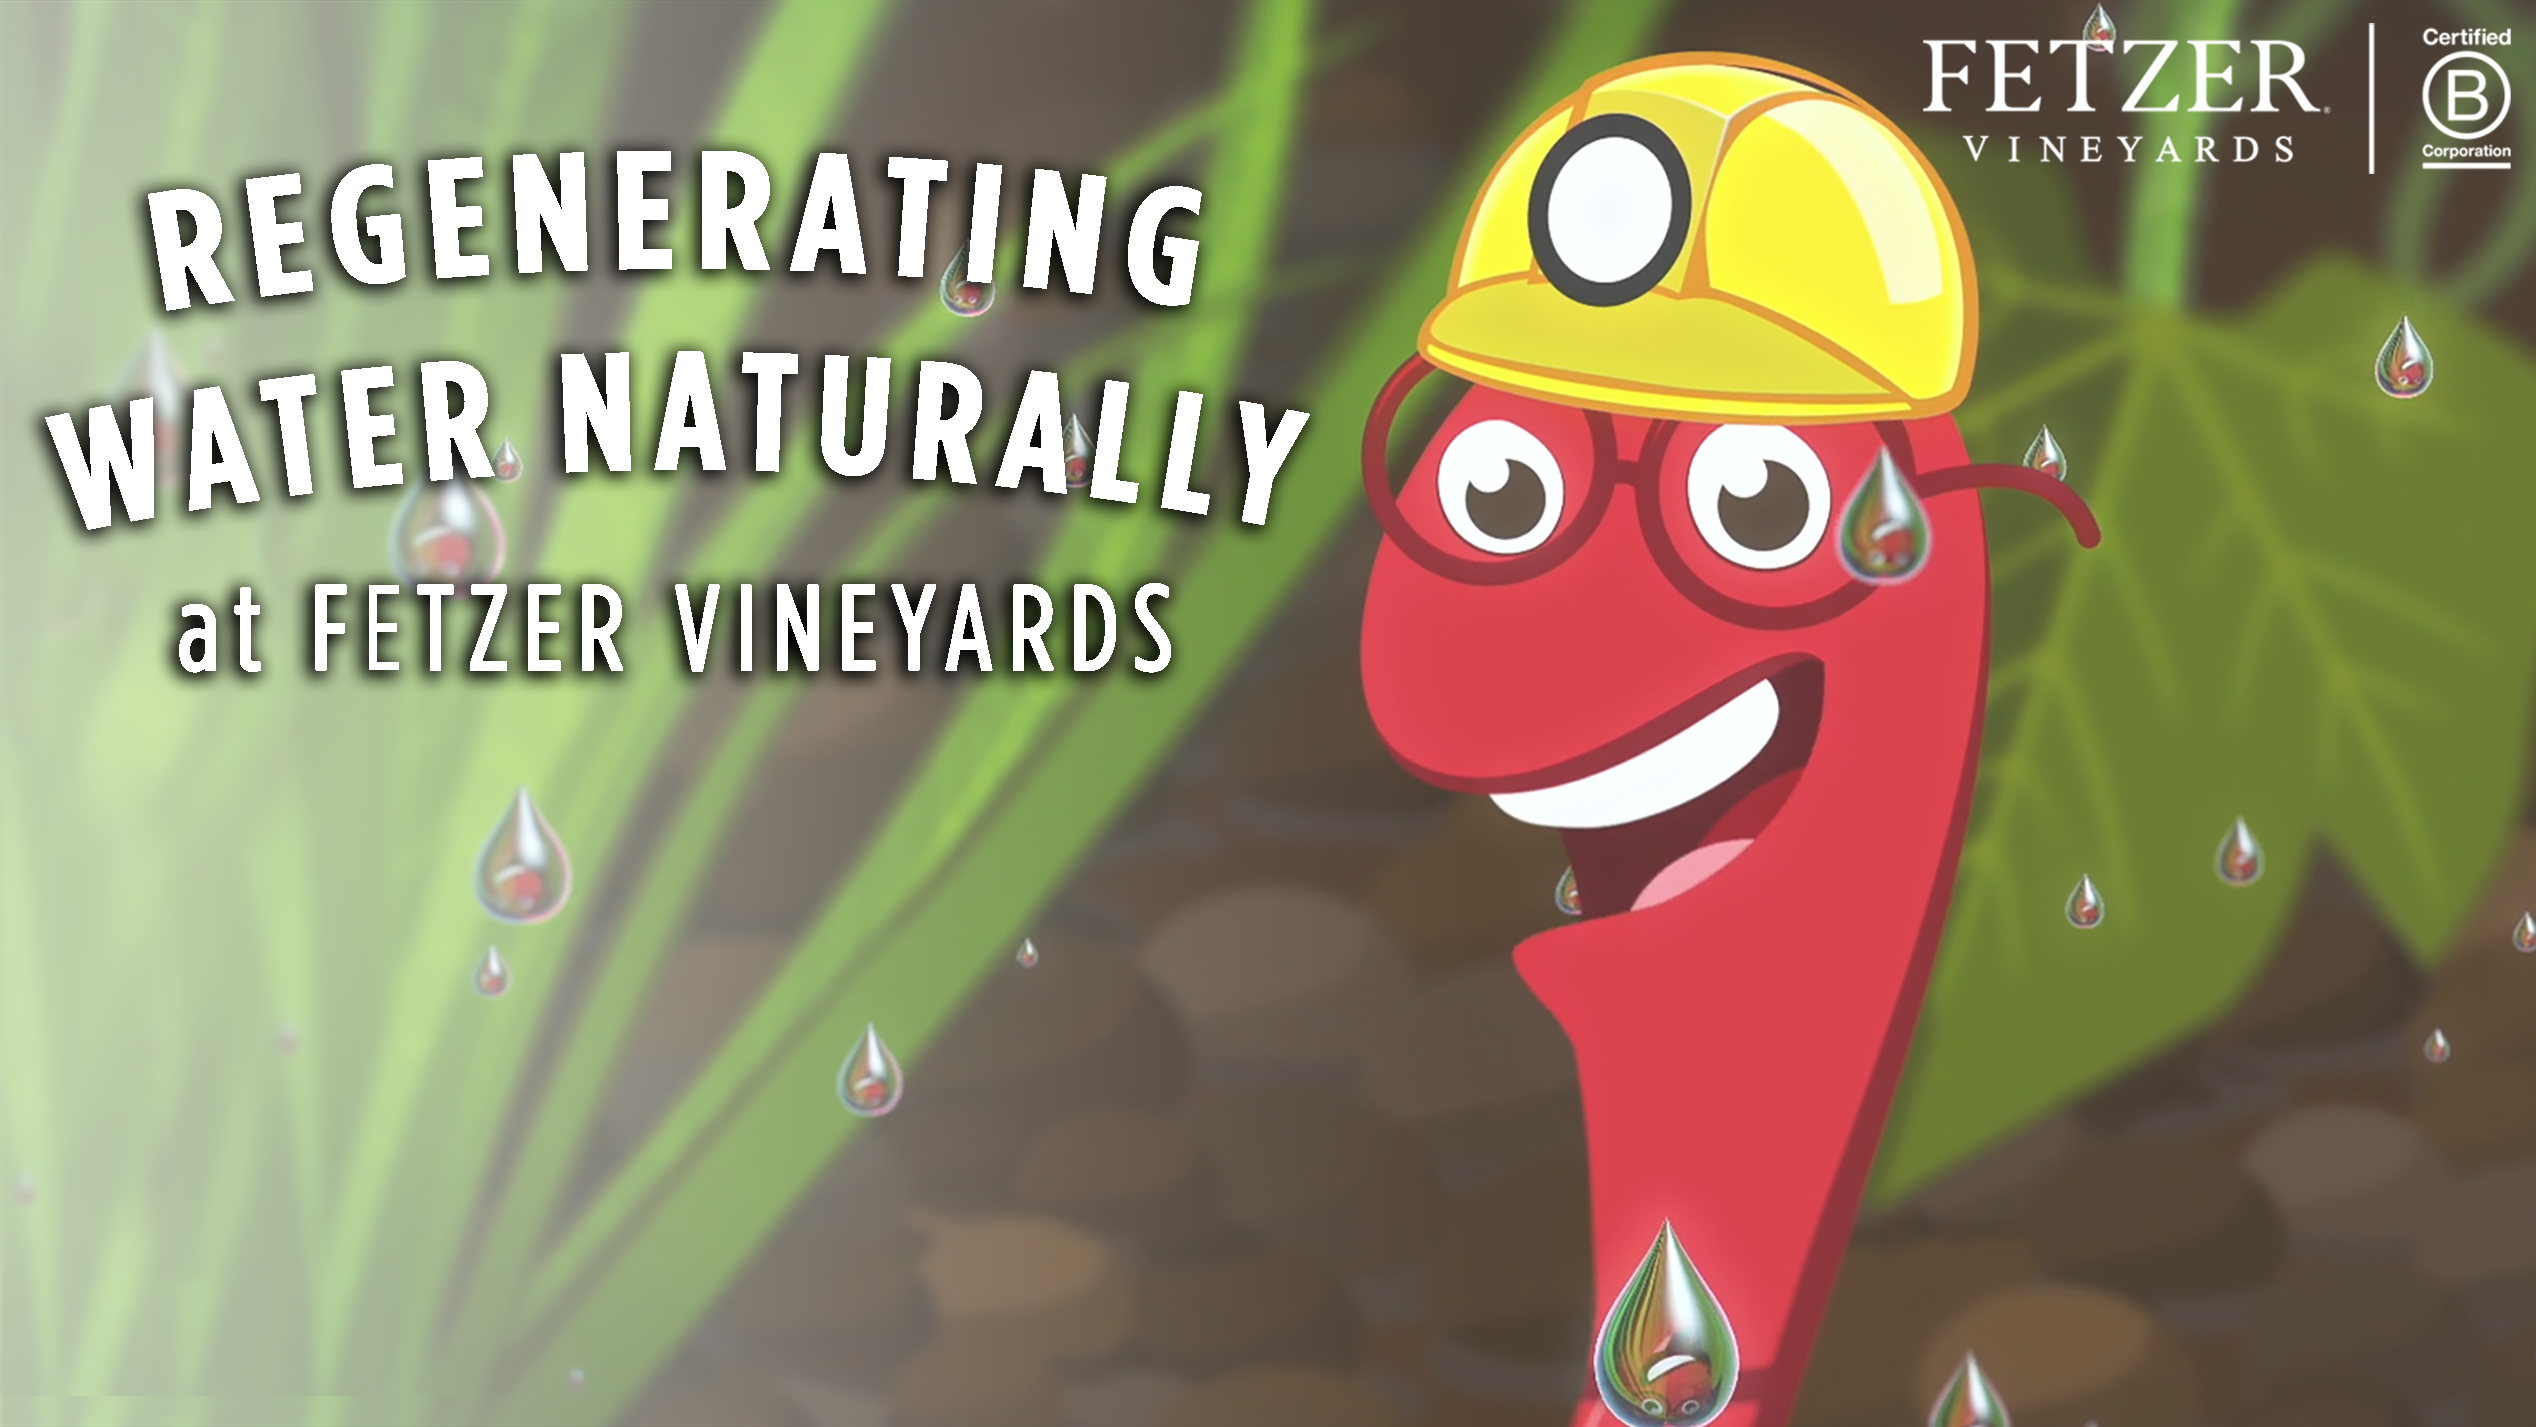 Fetzer Vineyards' Hard-Working Worms Save Energy, Regenerate Water &amp; Win Over Fans This Earth Day